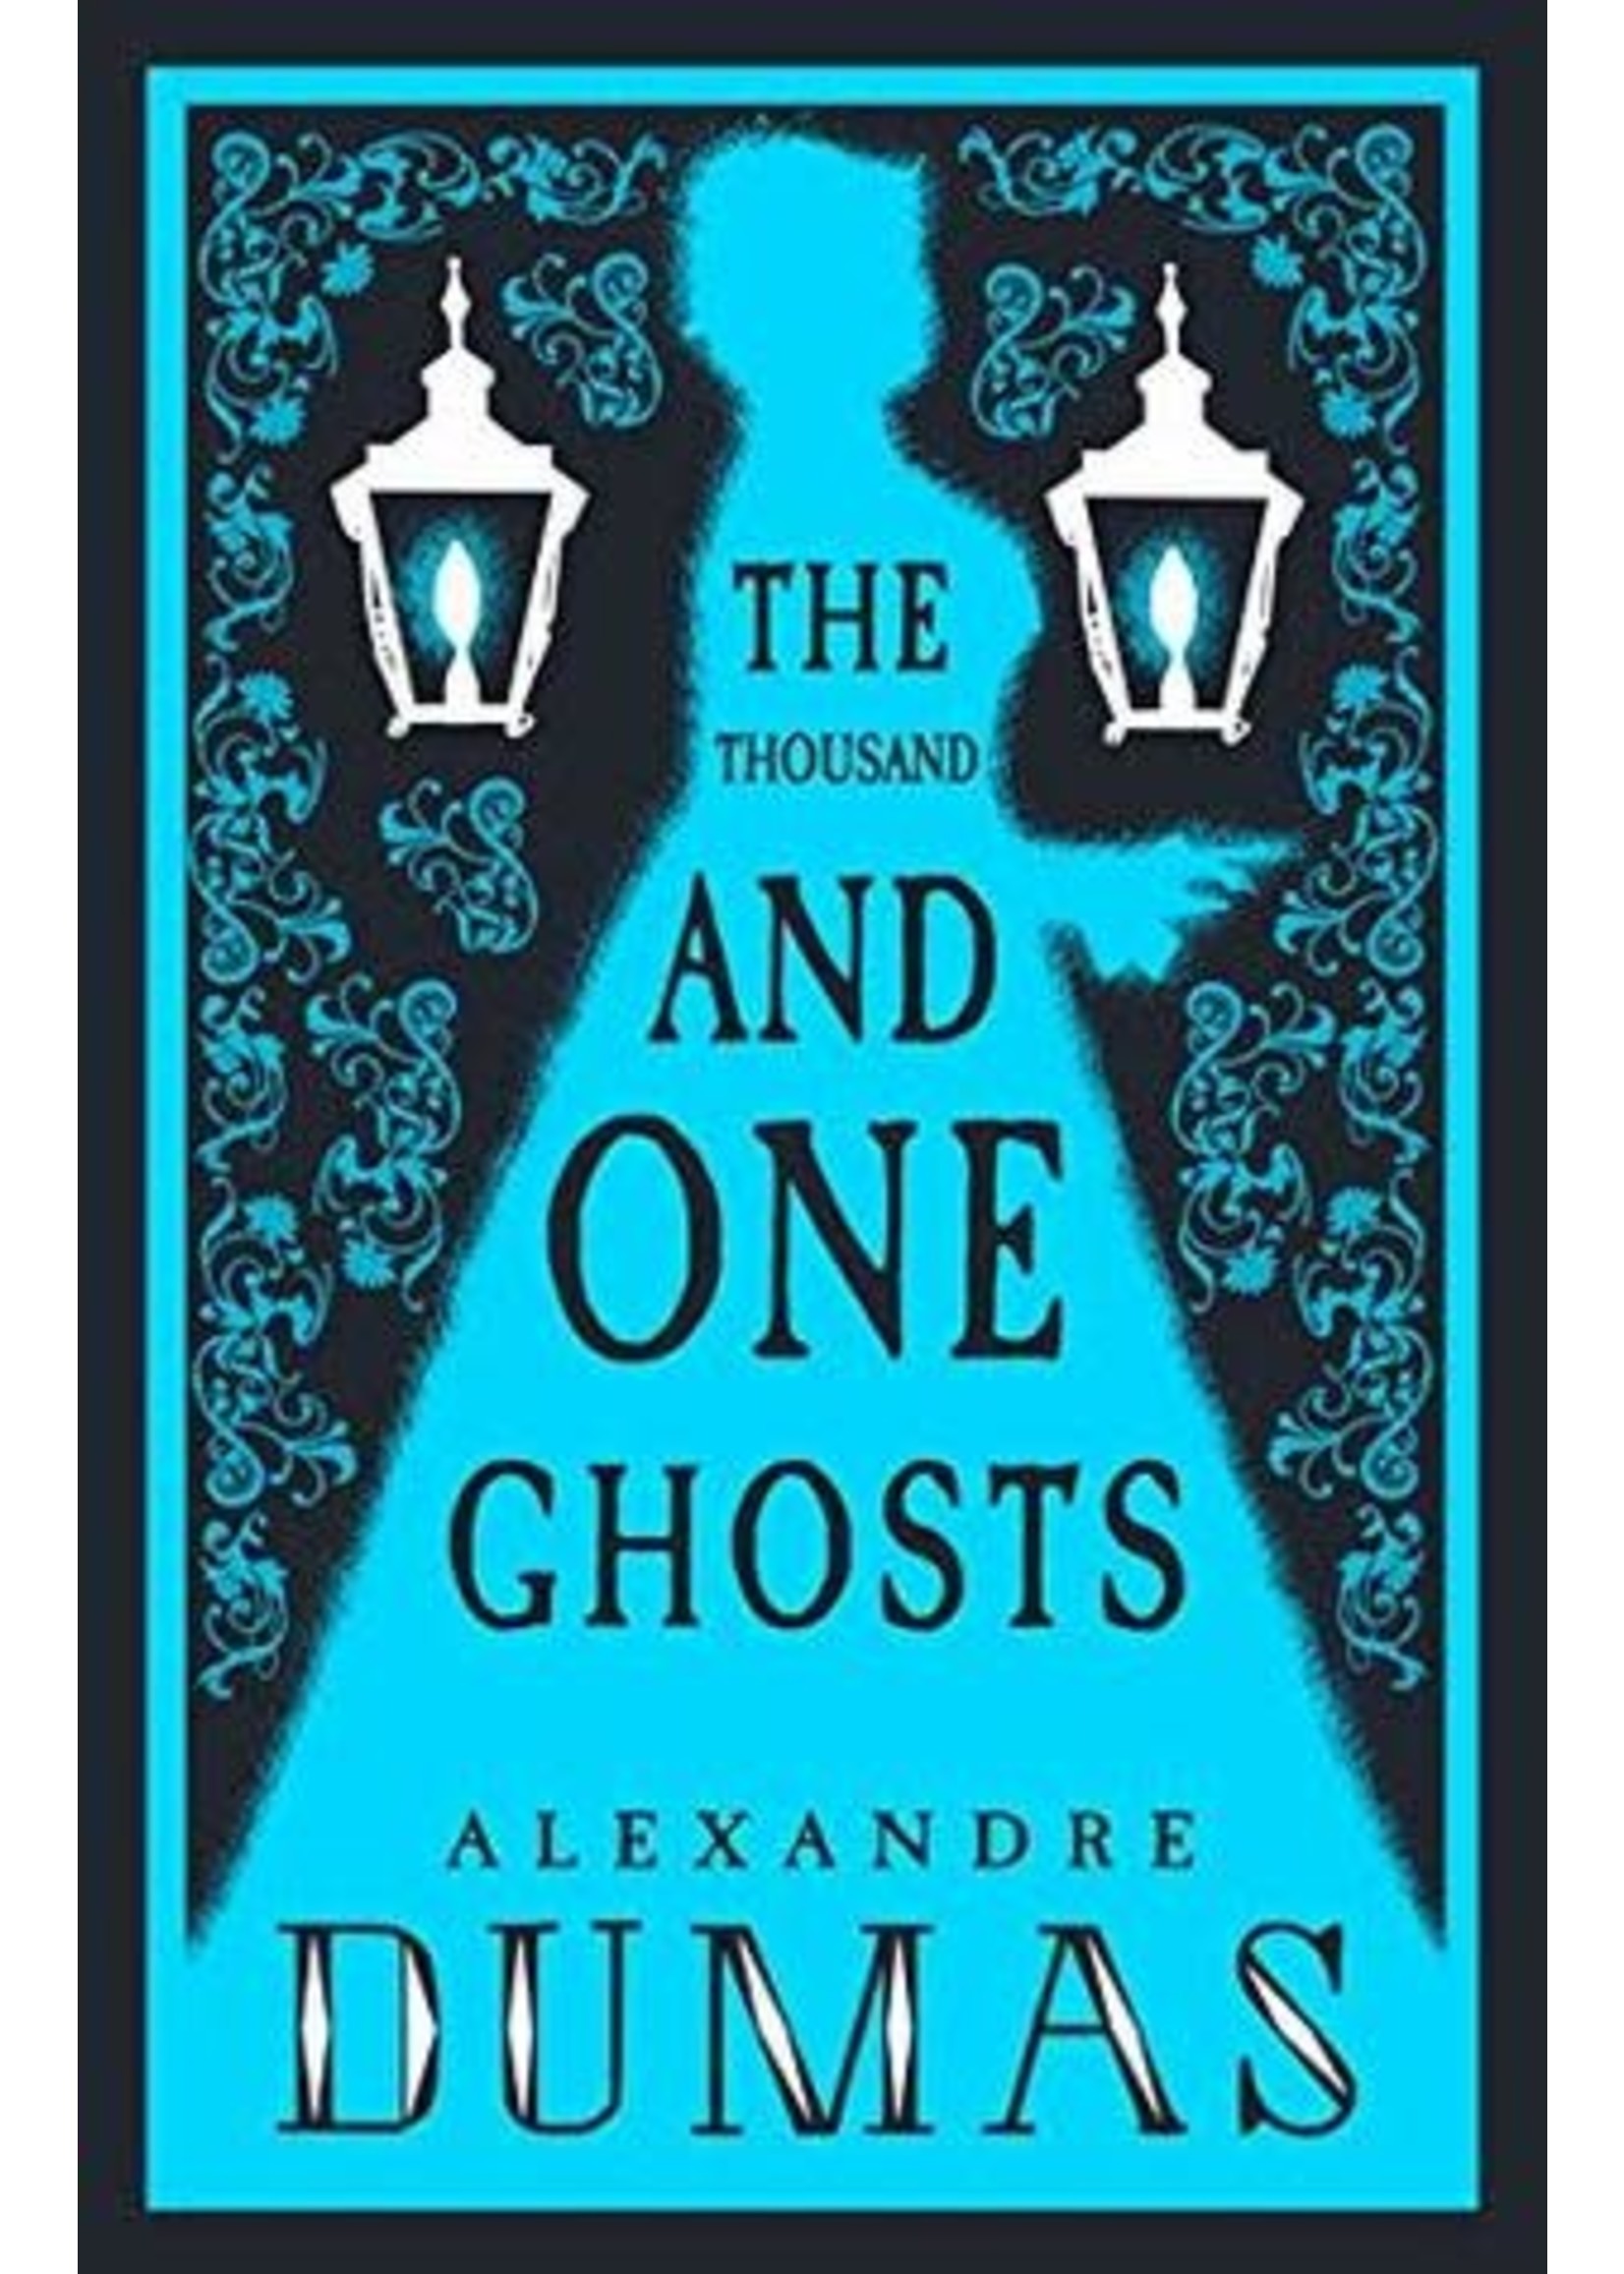 The Thousand and One Ghosts by Alexandre Dumas